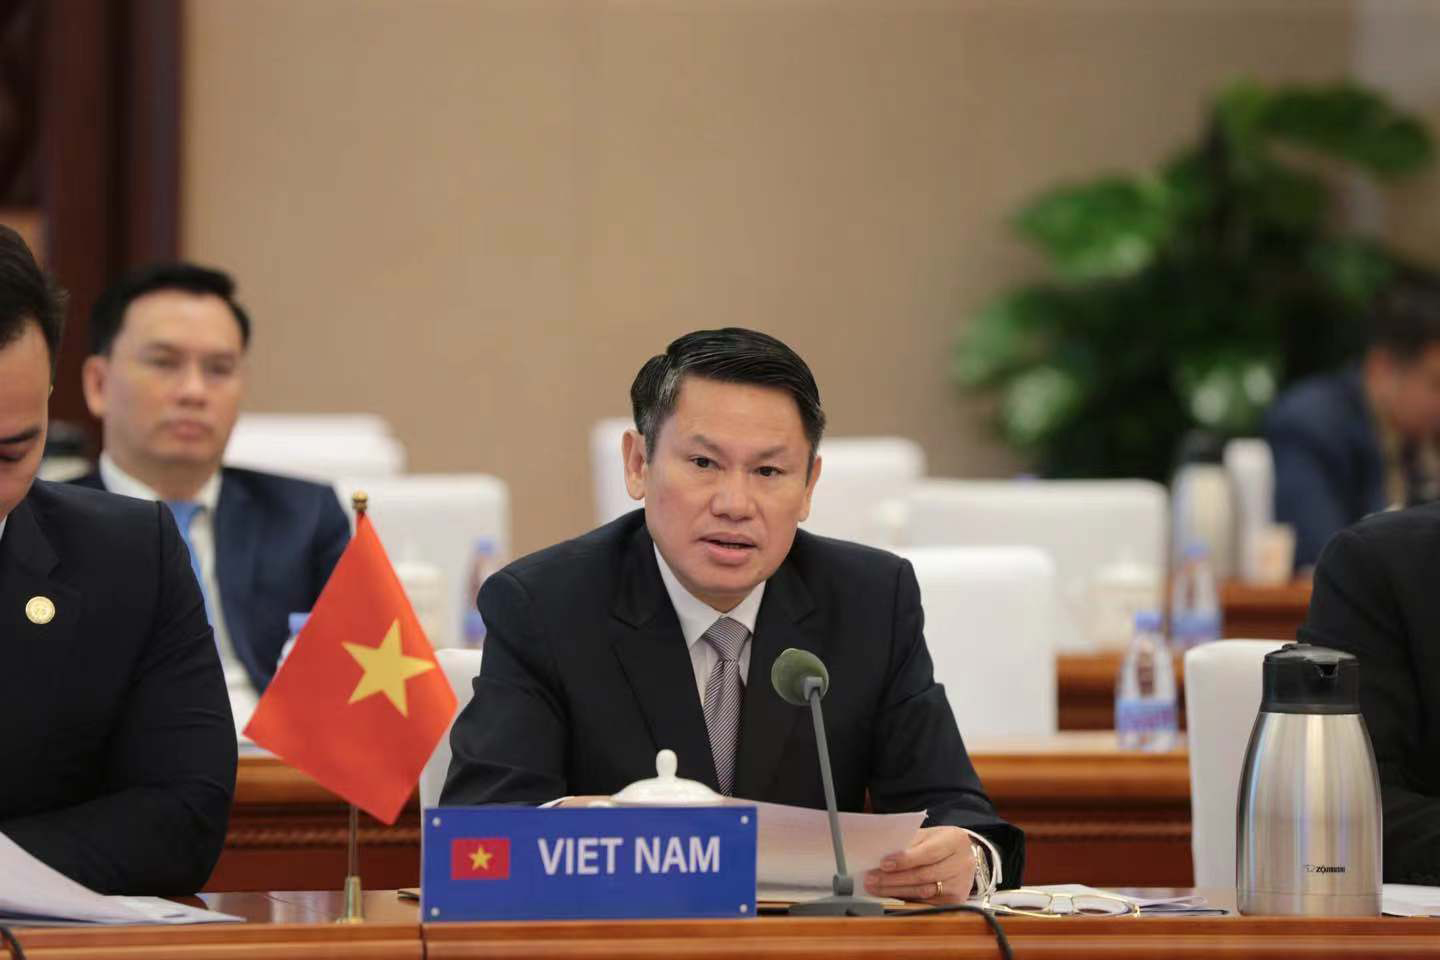 Director General of The Counter-Narcotics Police Department of Viet Nam Maj. Gen. Nguyen Van Vien outlining Viet Nam’s commitment to future cooperation under the Mekong MOU